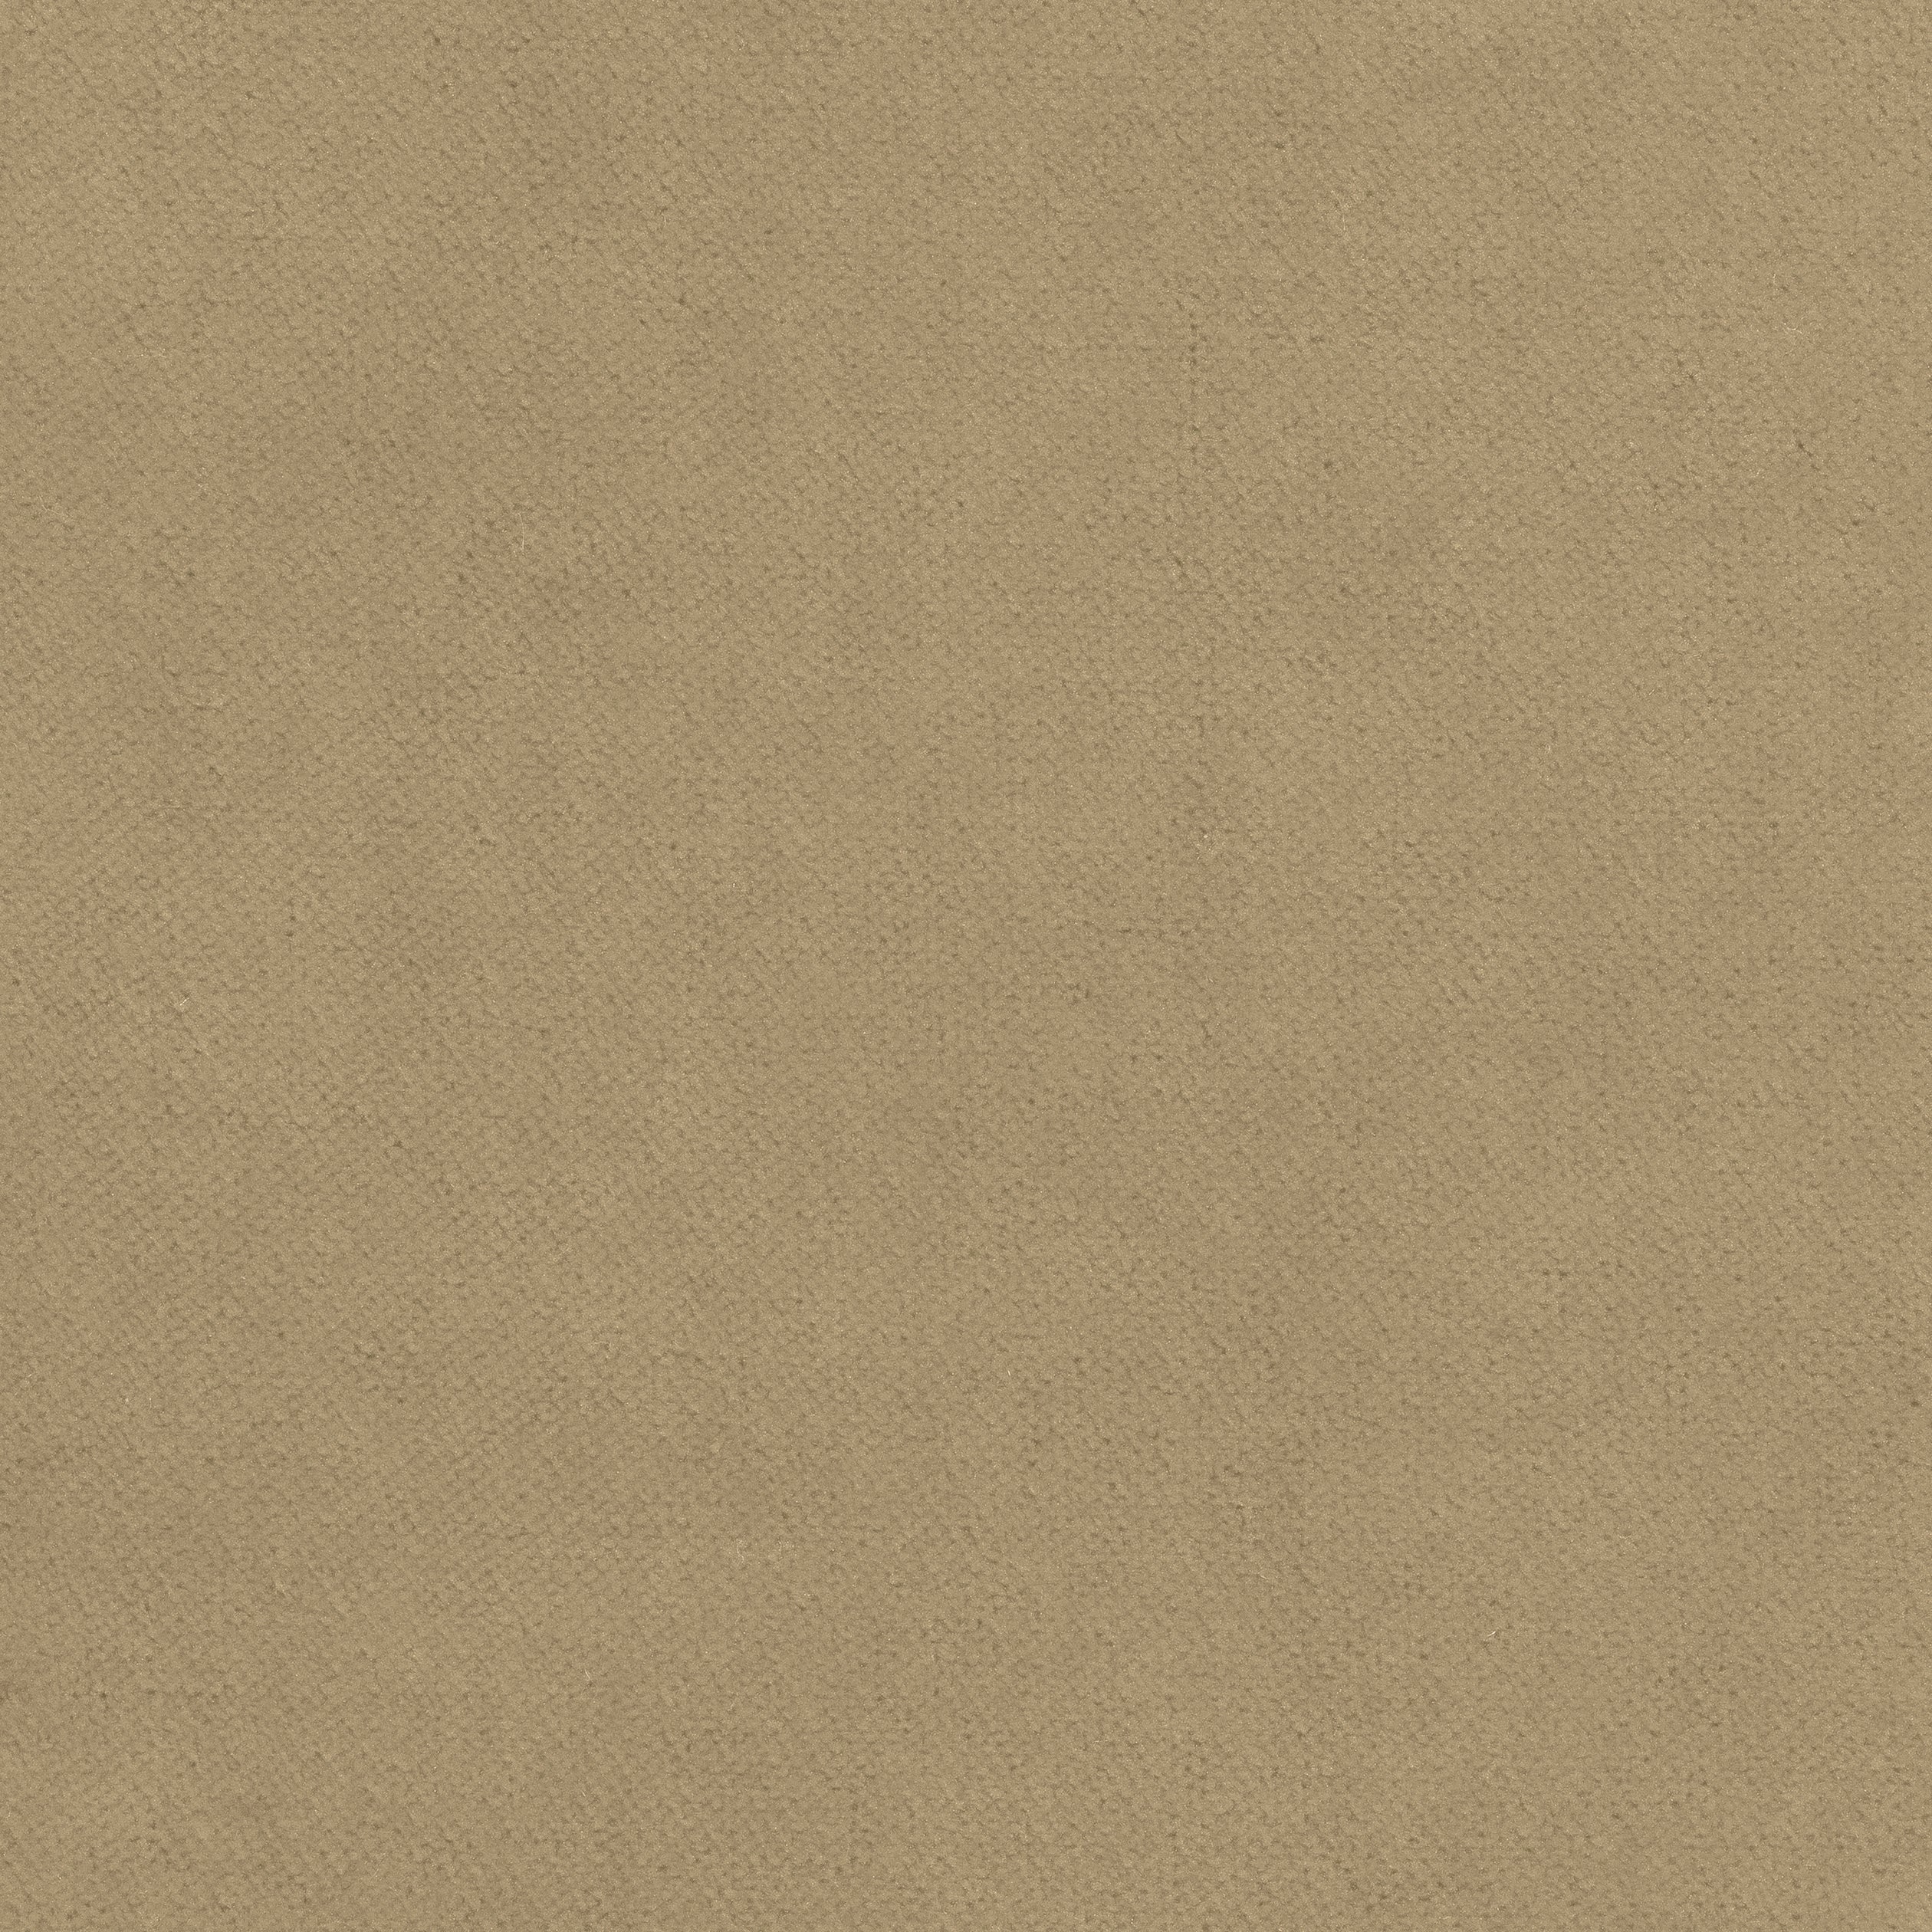 Club Velvet fabric in flax color - pattern number W7224 - by Thibaut in the Club Velvet collection